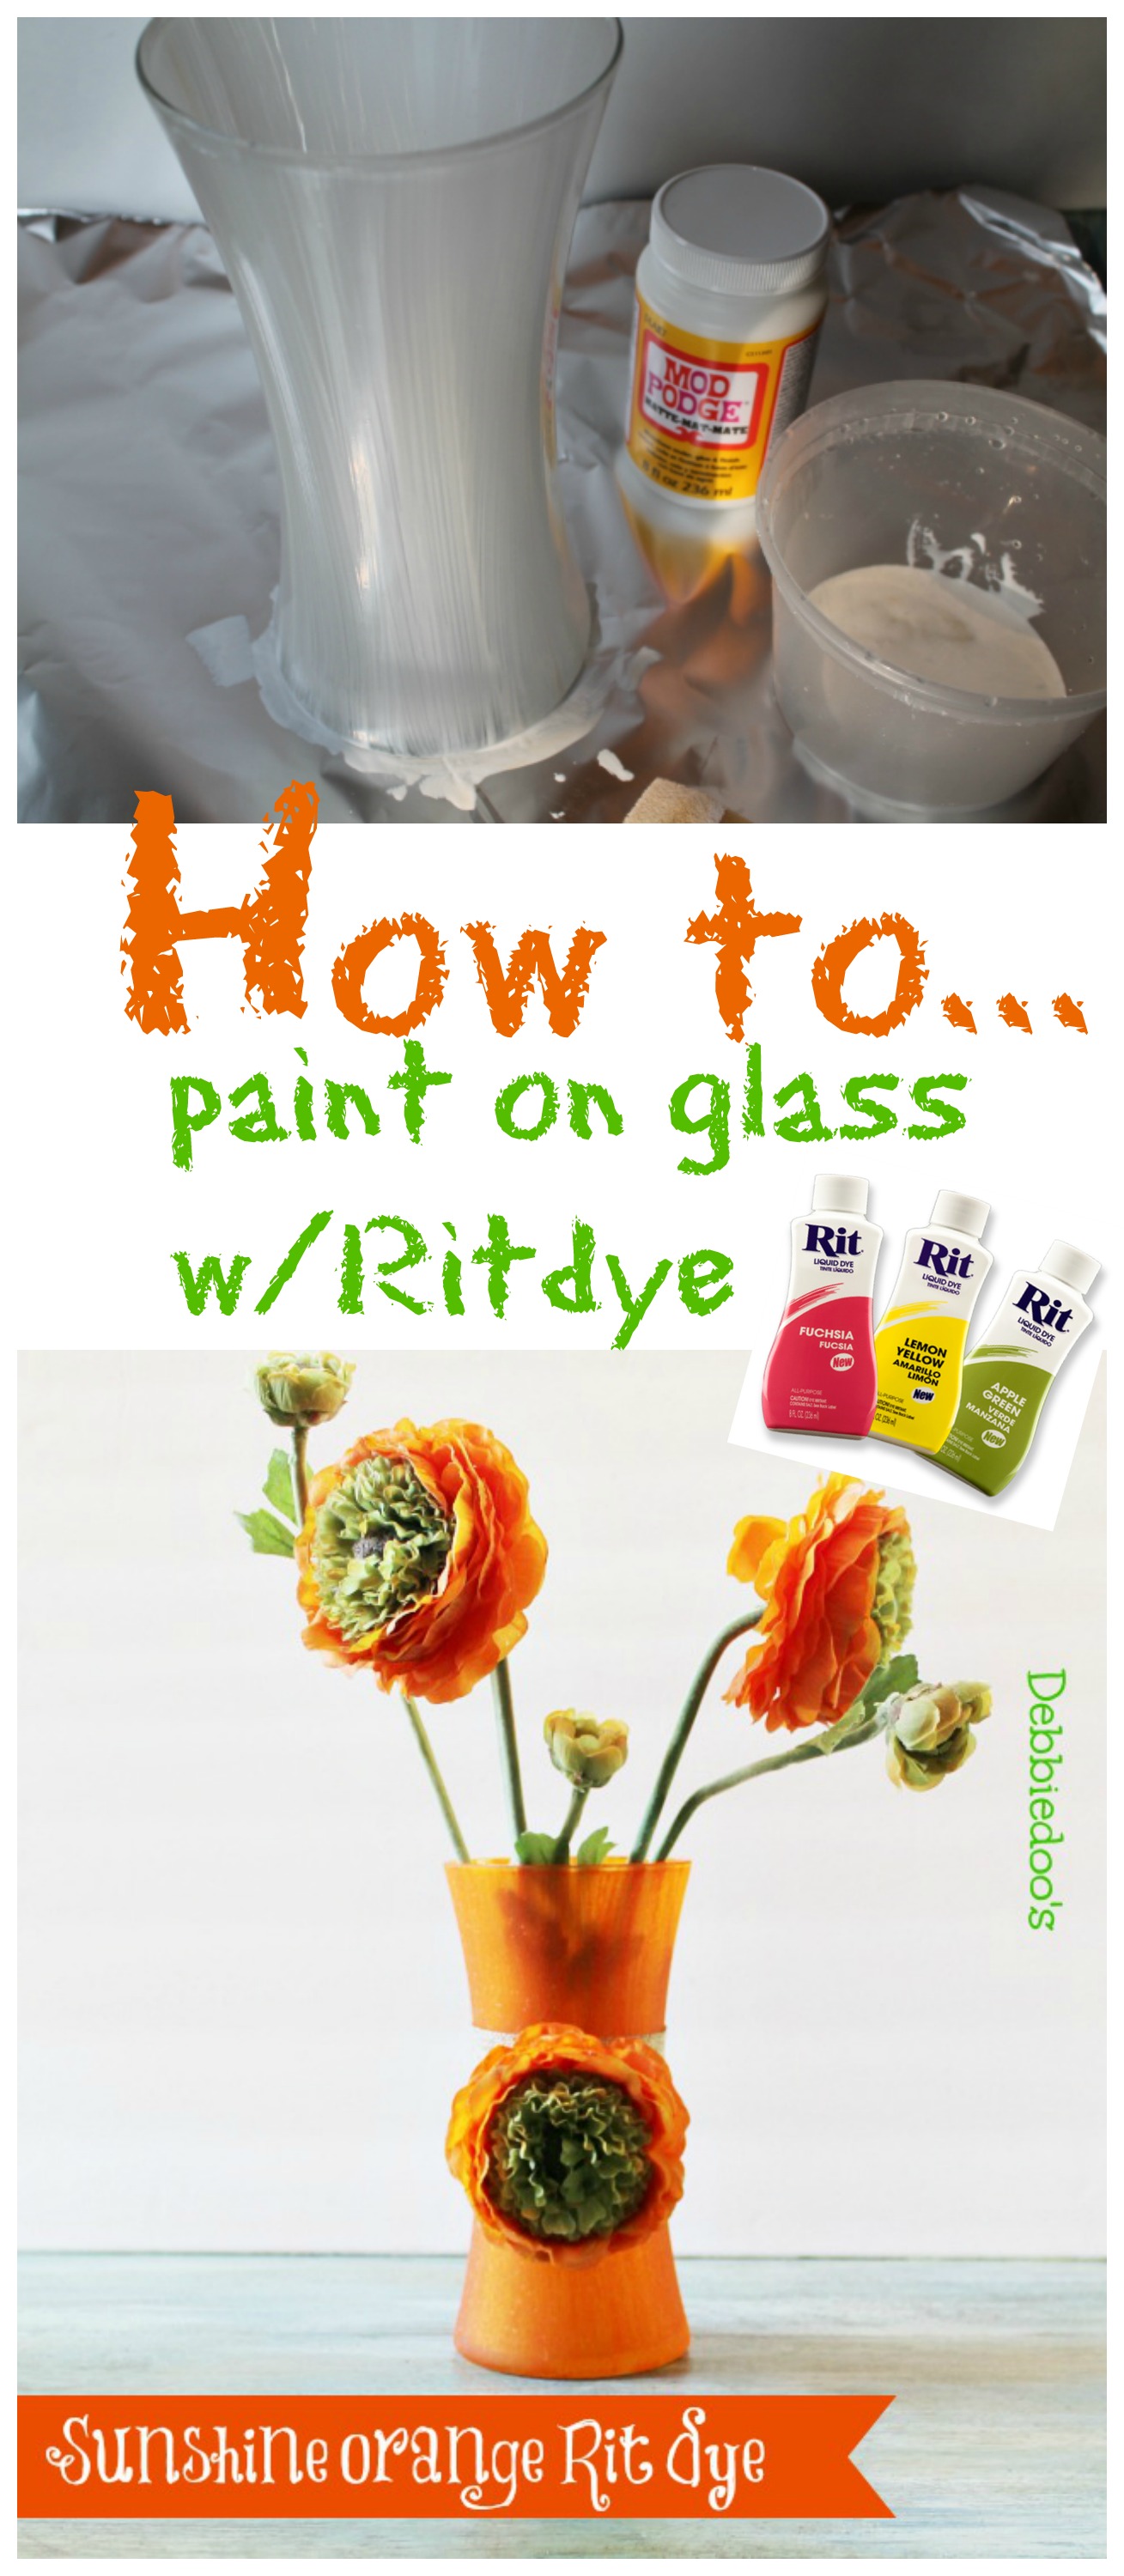 How to paint on glass with rit dye